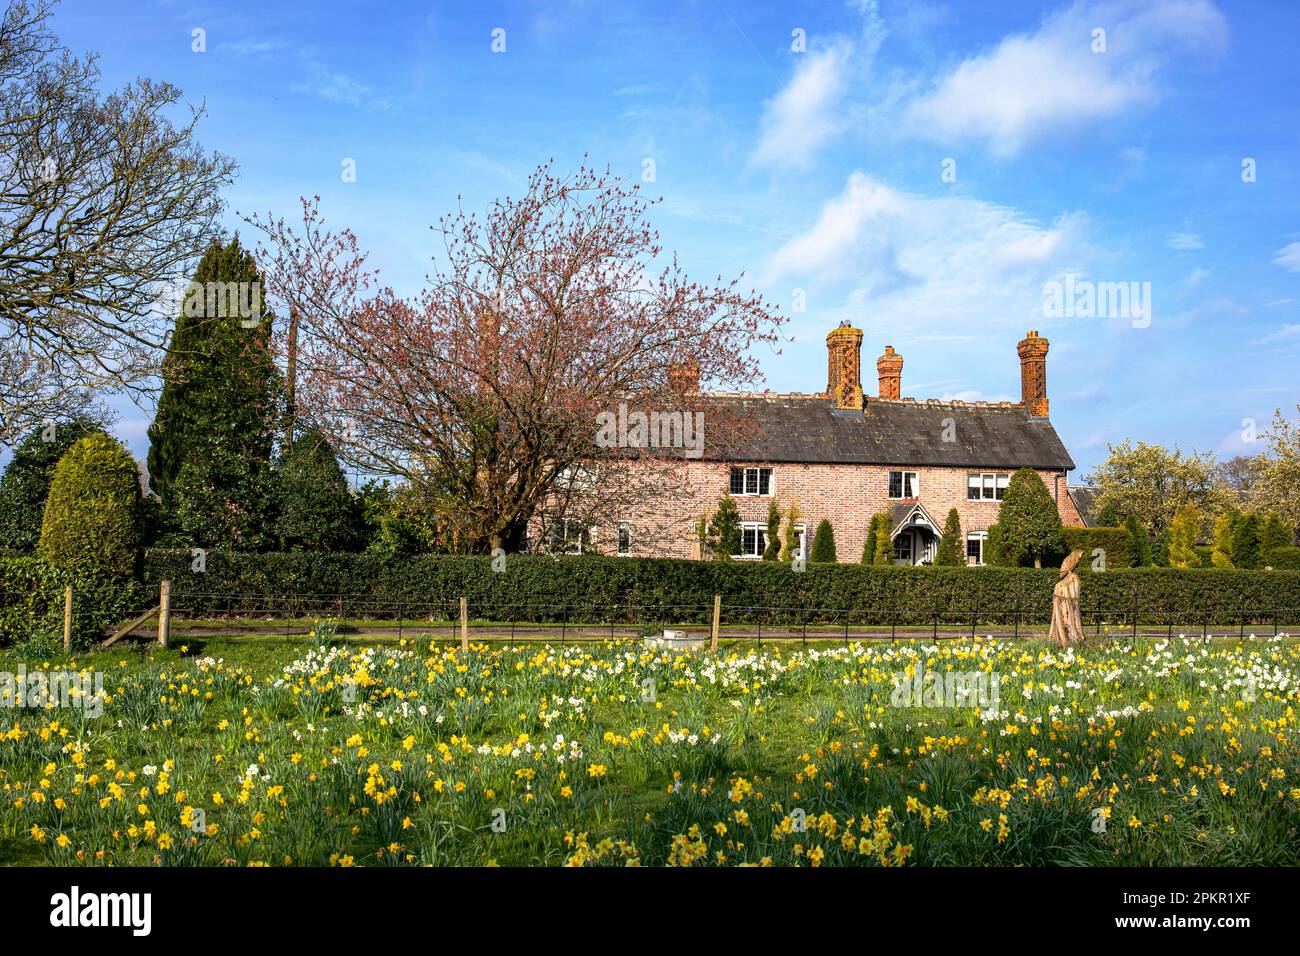 Daffodils, with owl cut from tree, in front of farm in Elworth near Sandbach Cheshire UK Stock Photo